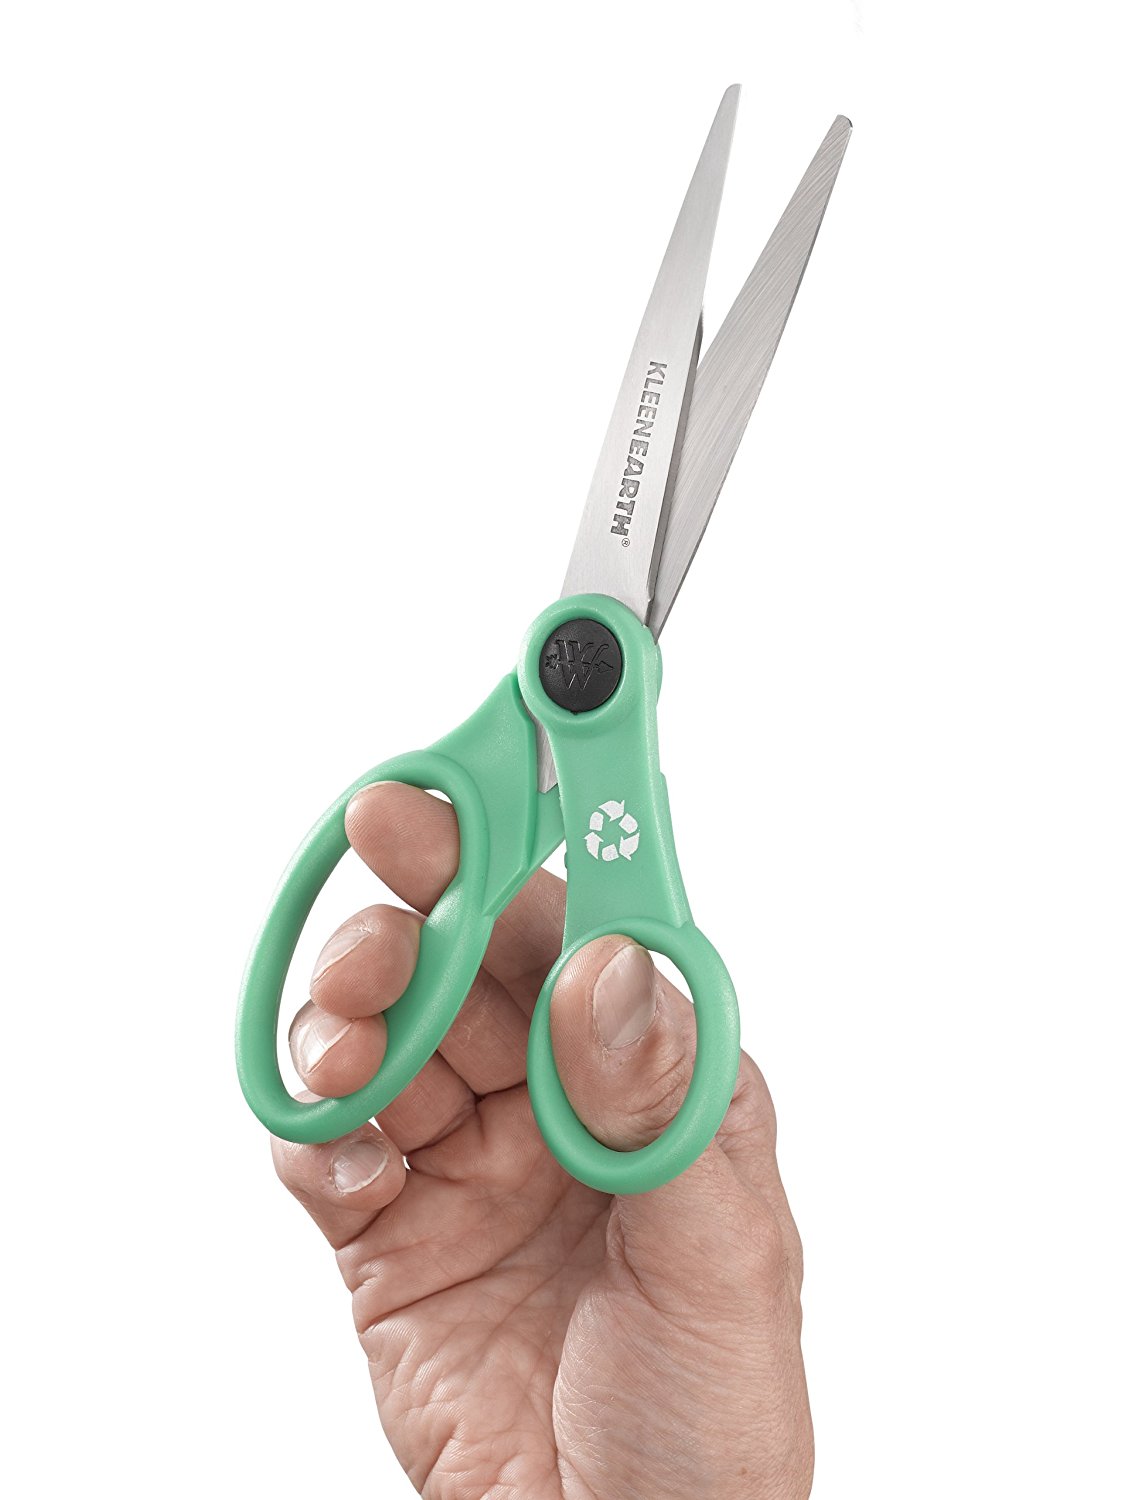 Westcott Kleenearth Recycled Scissors, 8", Straight, Anti-Microbial, Stainless Steel, for Office, Green, 1-Count - image 2 of 8